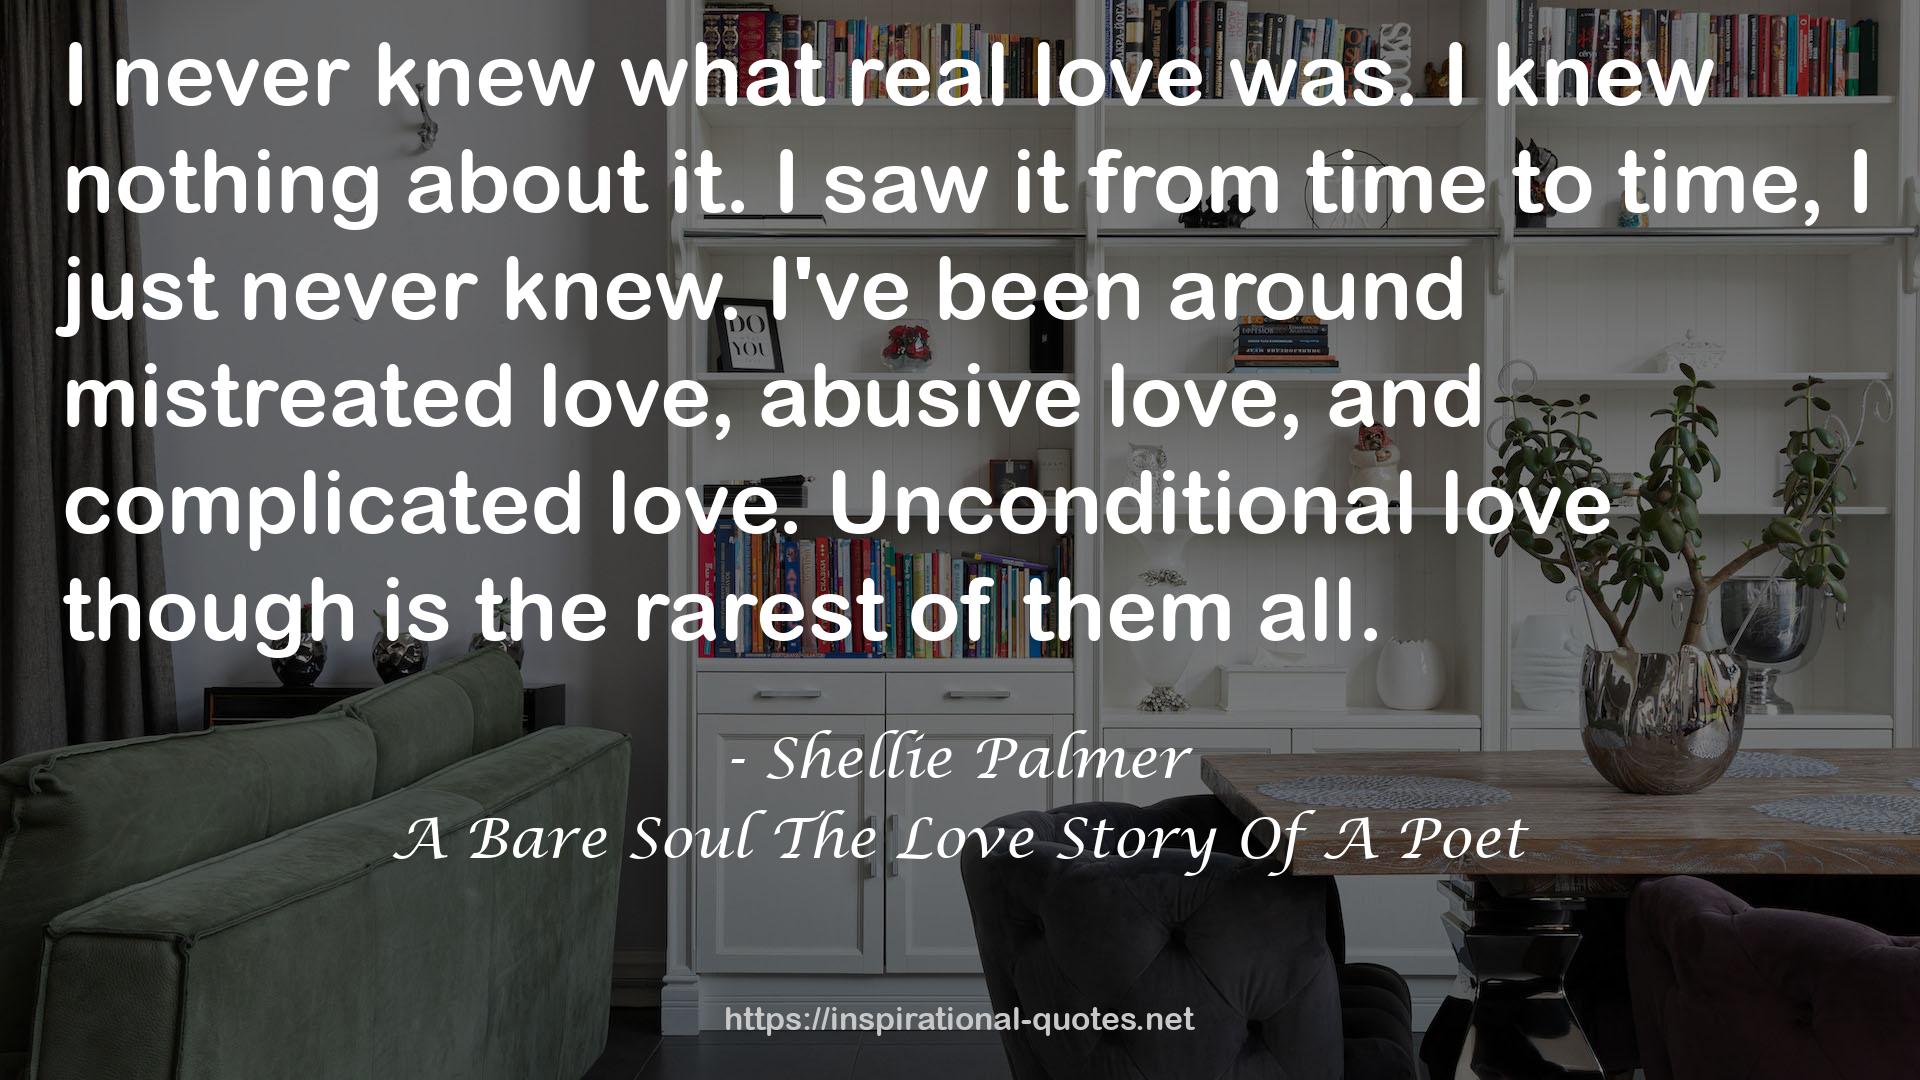 A Bare Soul The Love Story Of A Poet QUOTES